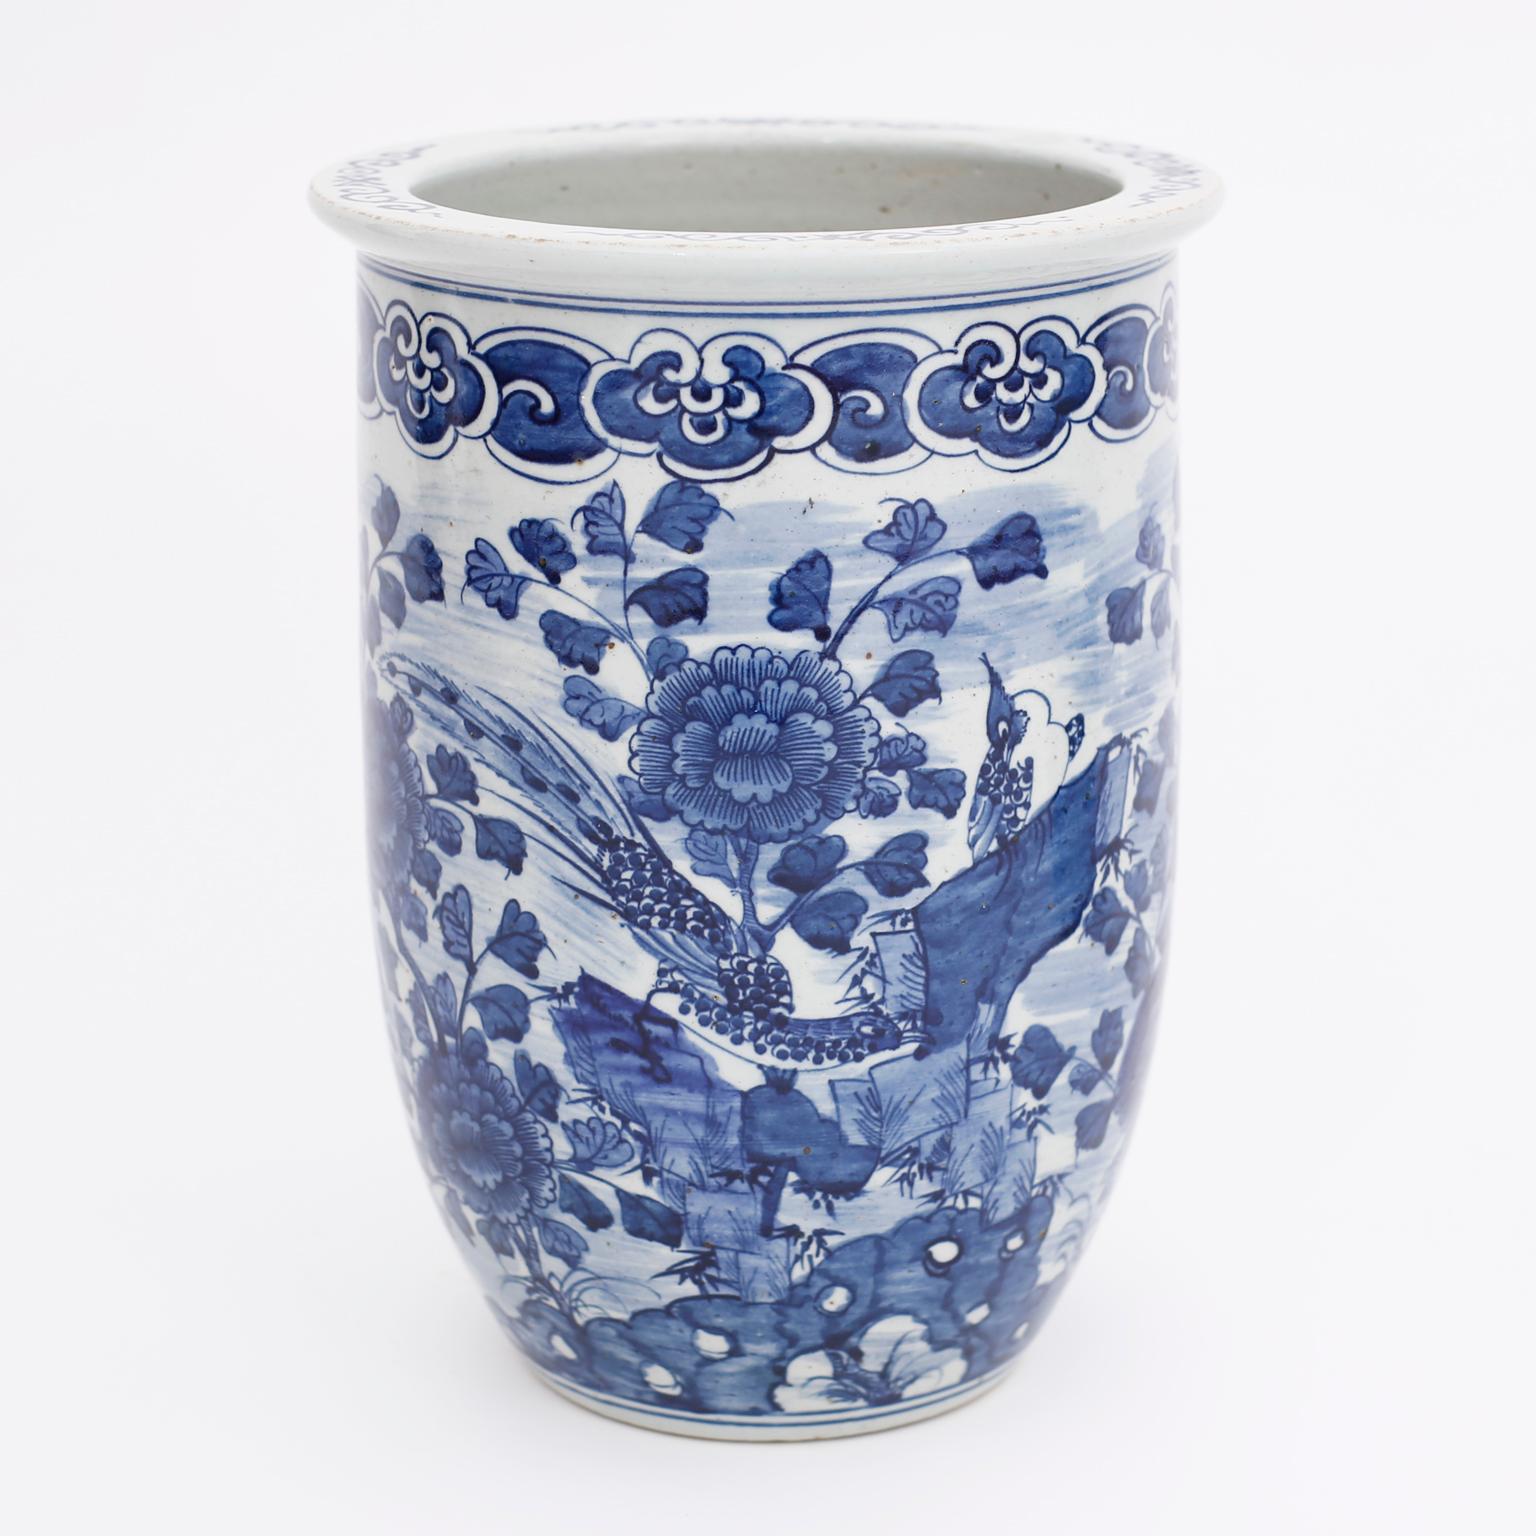 Contemporary Pair of Chinese Blue and White Porcelain Vases